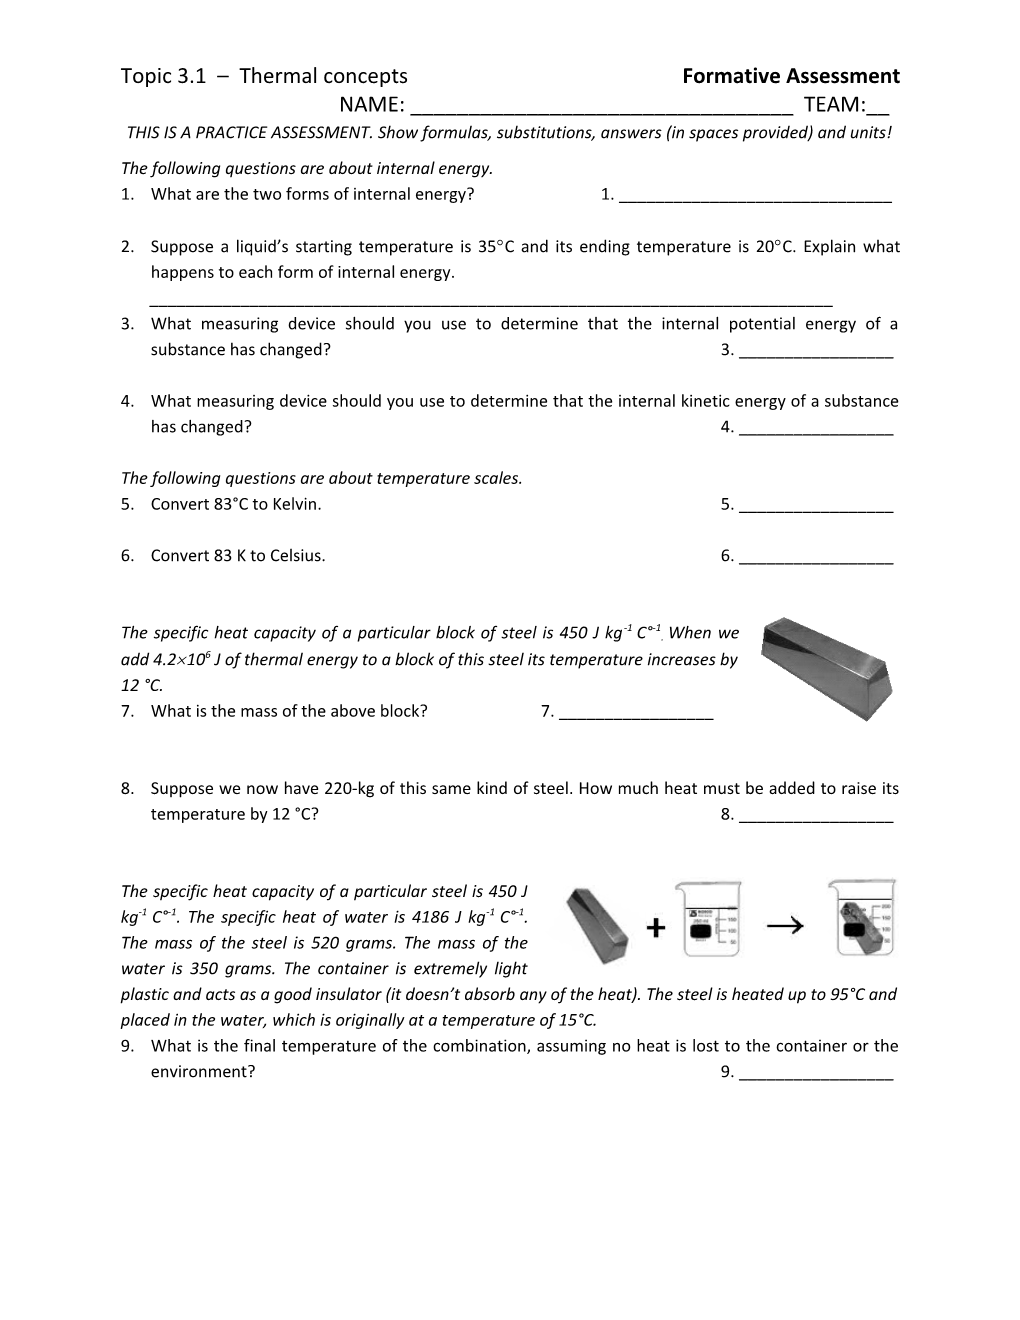 Topic 1.1 Measurements in Physics Formative Assessment s1